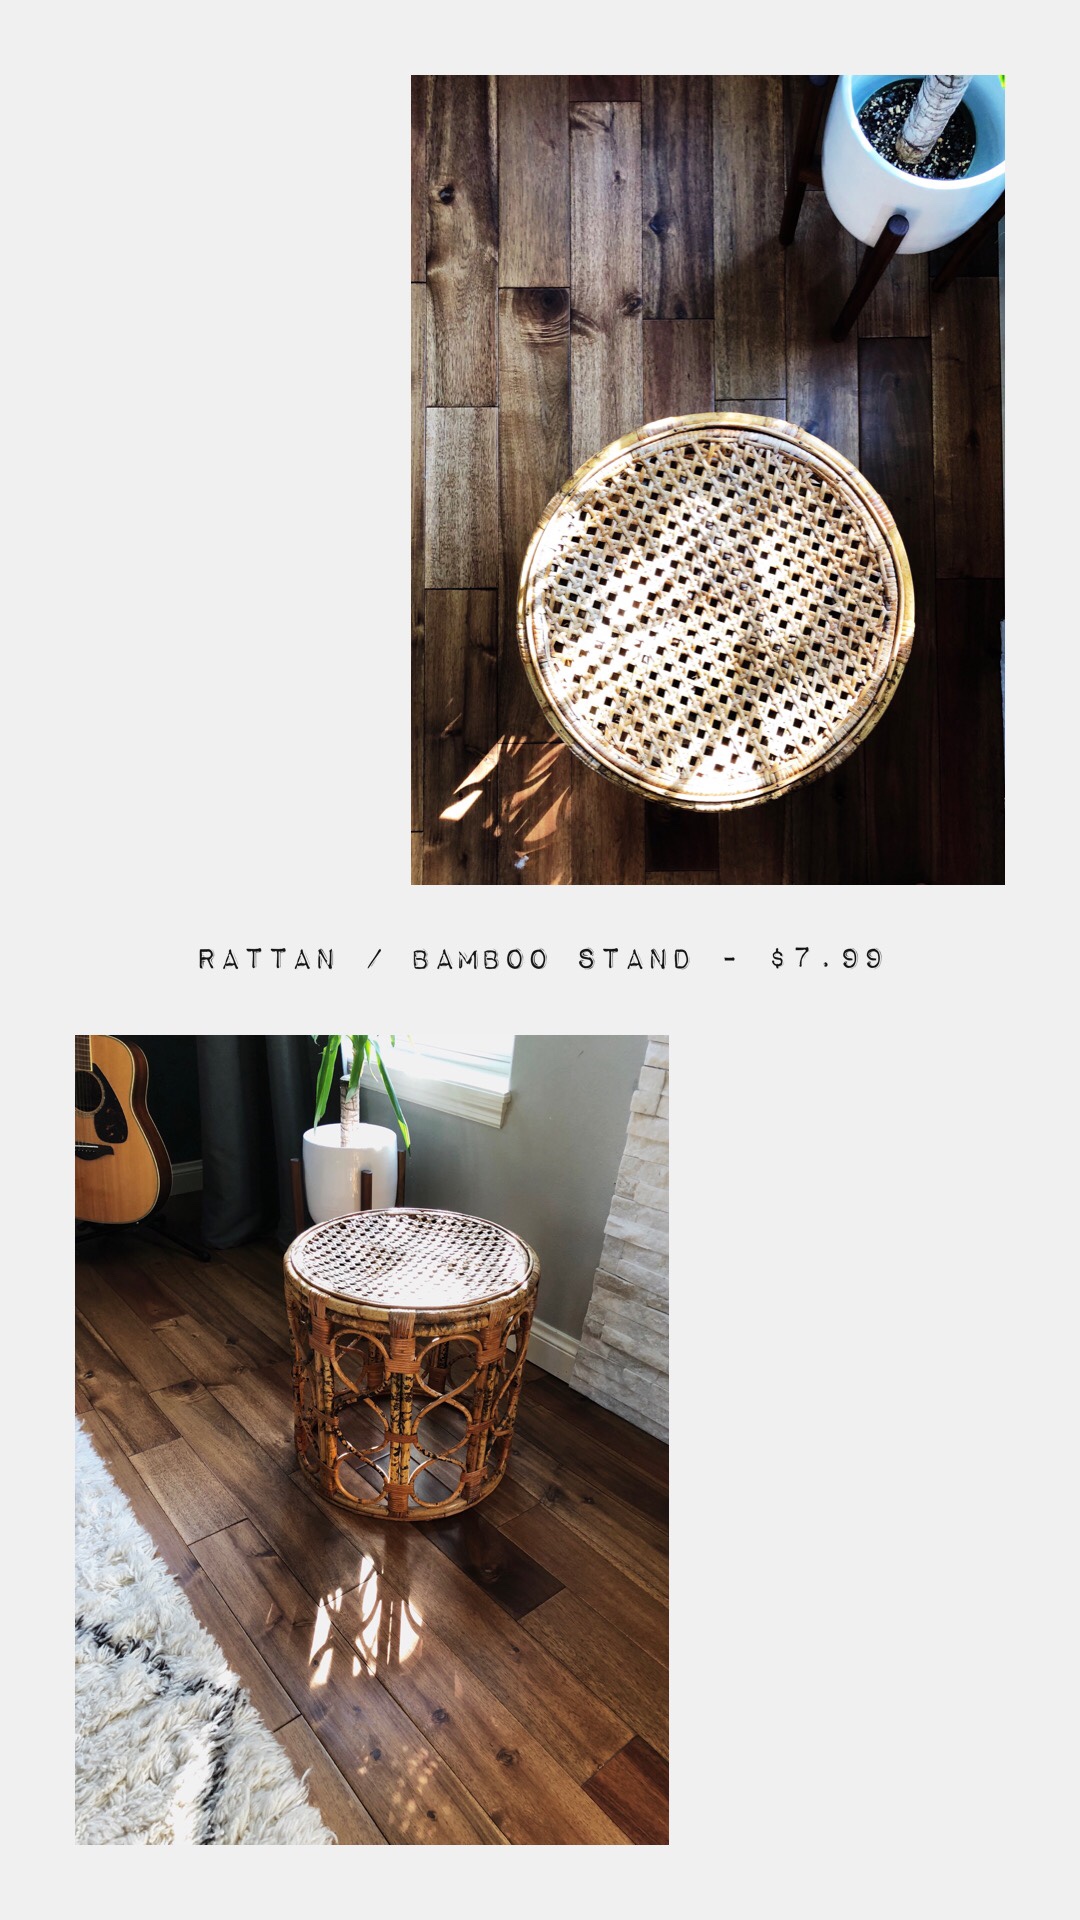 A collage of 2 photos that show a tan rattan or bamboo stand that the author added to her living room as additional seating. One photo is of the top of the seat and the other is a side view. This home decor item was purchased sustainably at a local consignment shop.